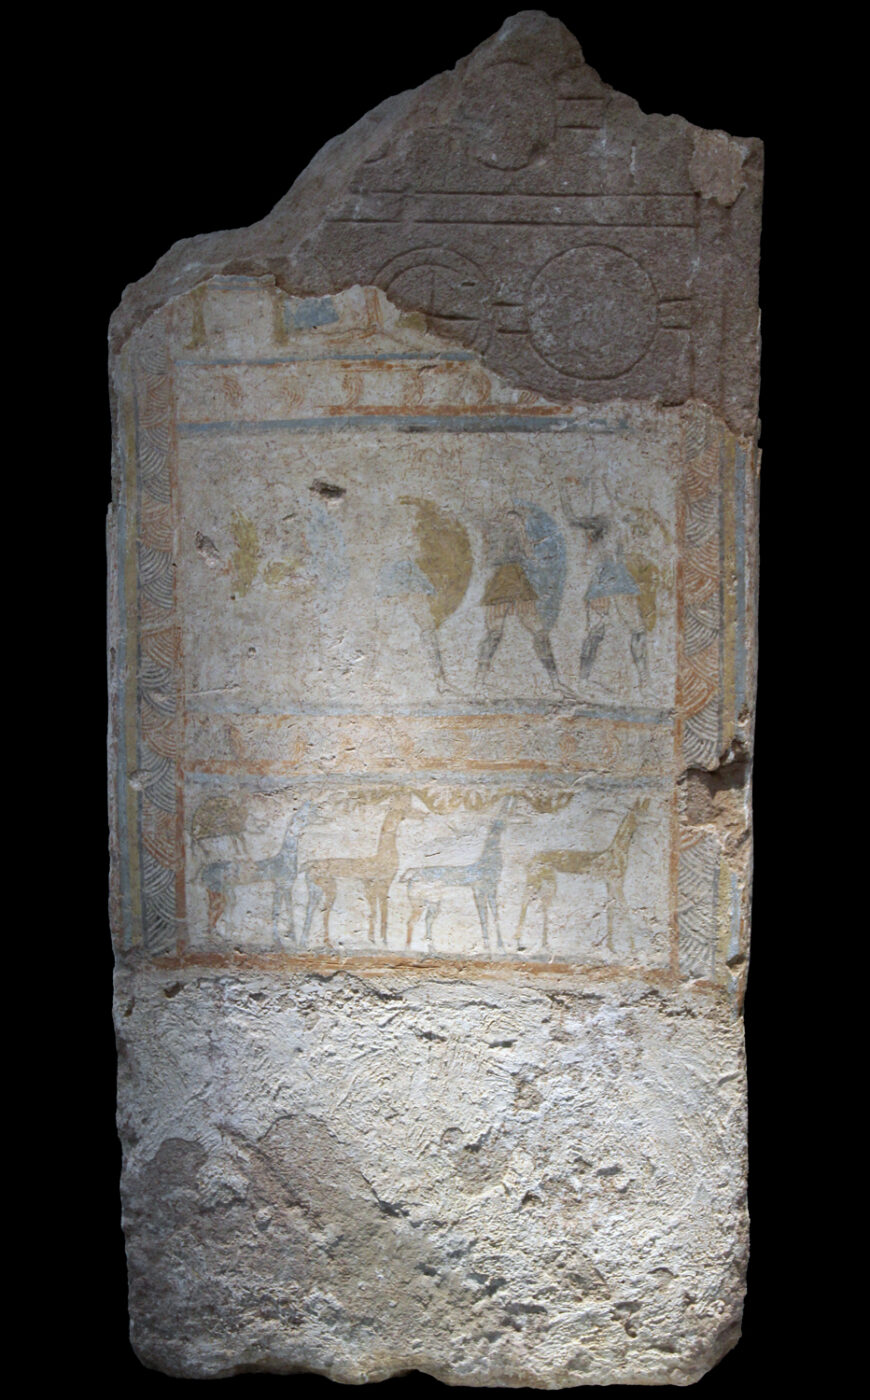 Painted Stele, painted decoration c. 1200–1100 B.C.E., stone covered in plaster and paint, 91 cm high (National Archaeological Museum, Athens; photo: CC0 1.0)